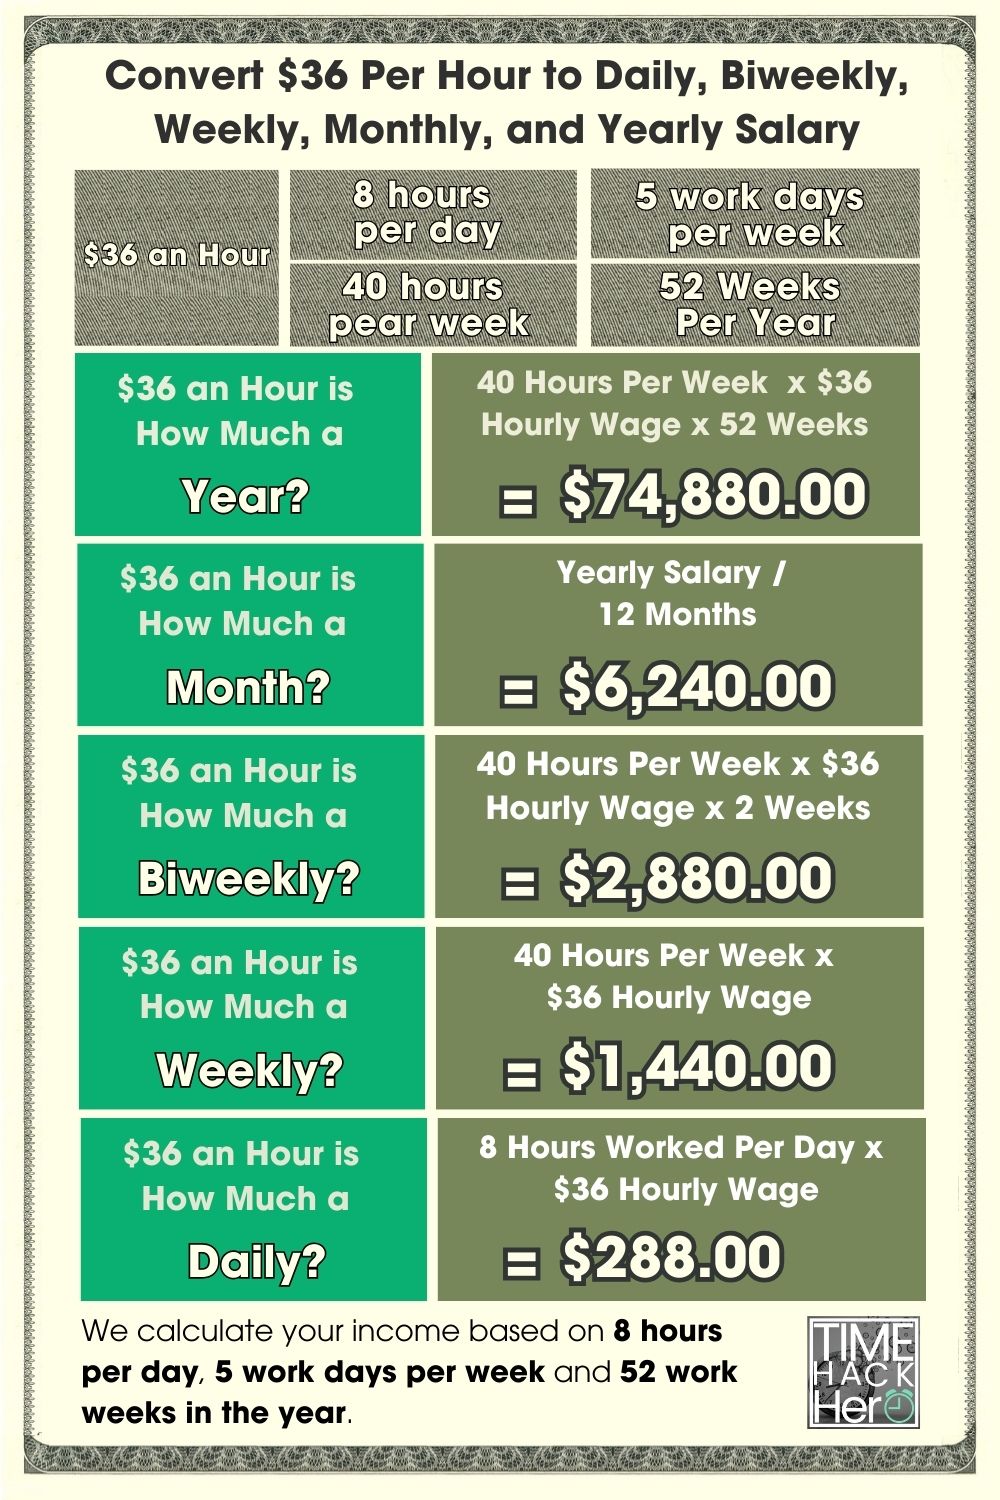 Convert $36 Per Hour to Daily, Biweekly, Weekly, Monthly, and Yearly Salary